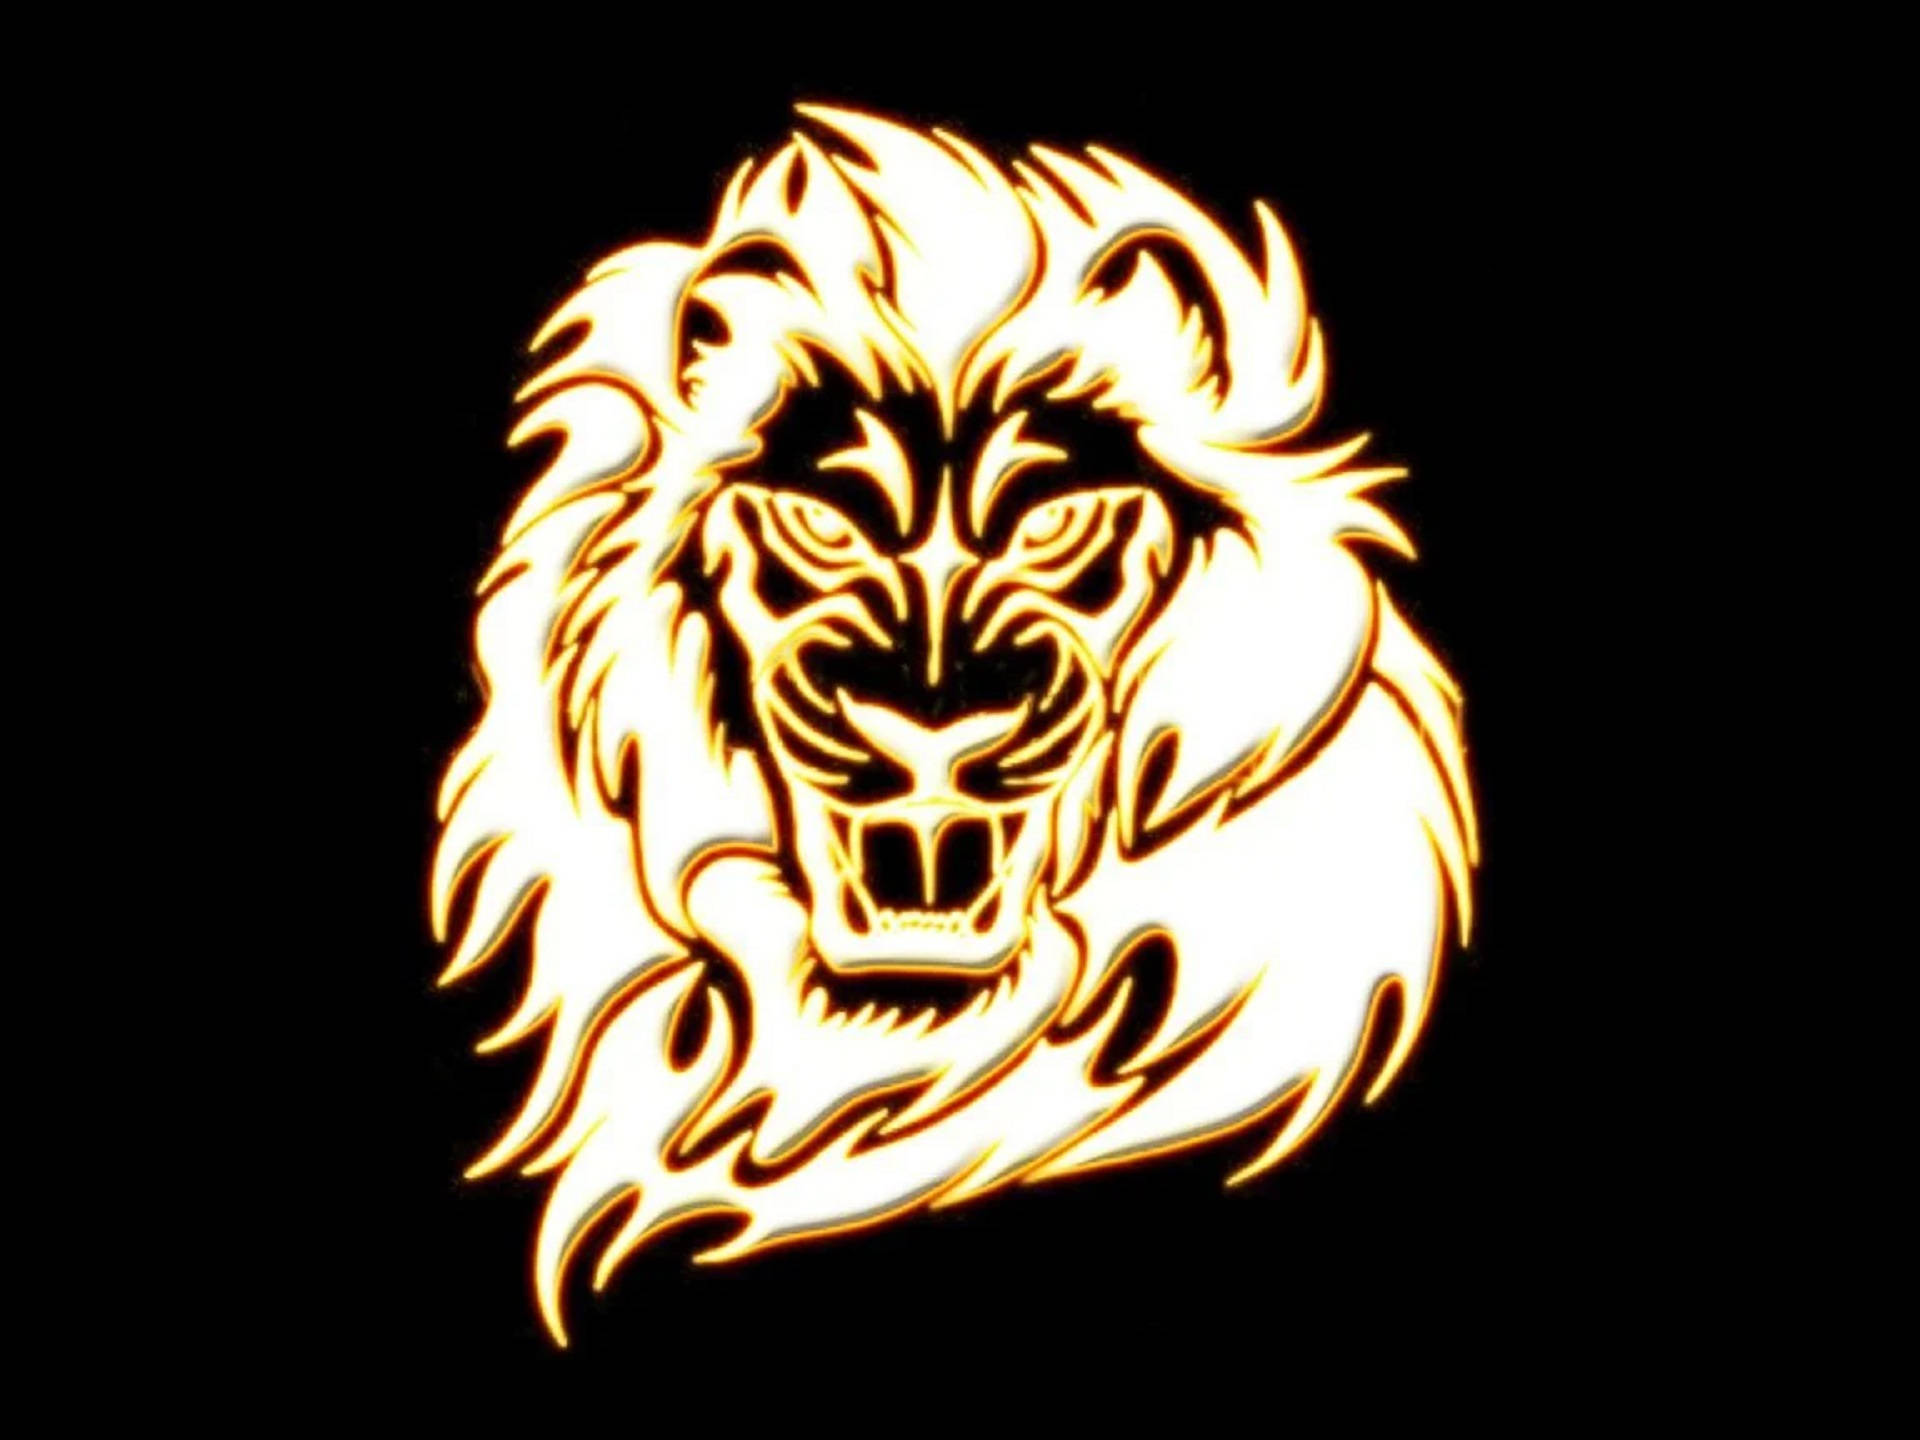 Shiny Lion Head In Black Background